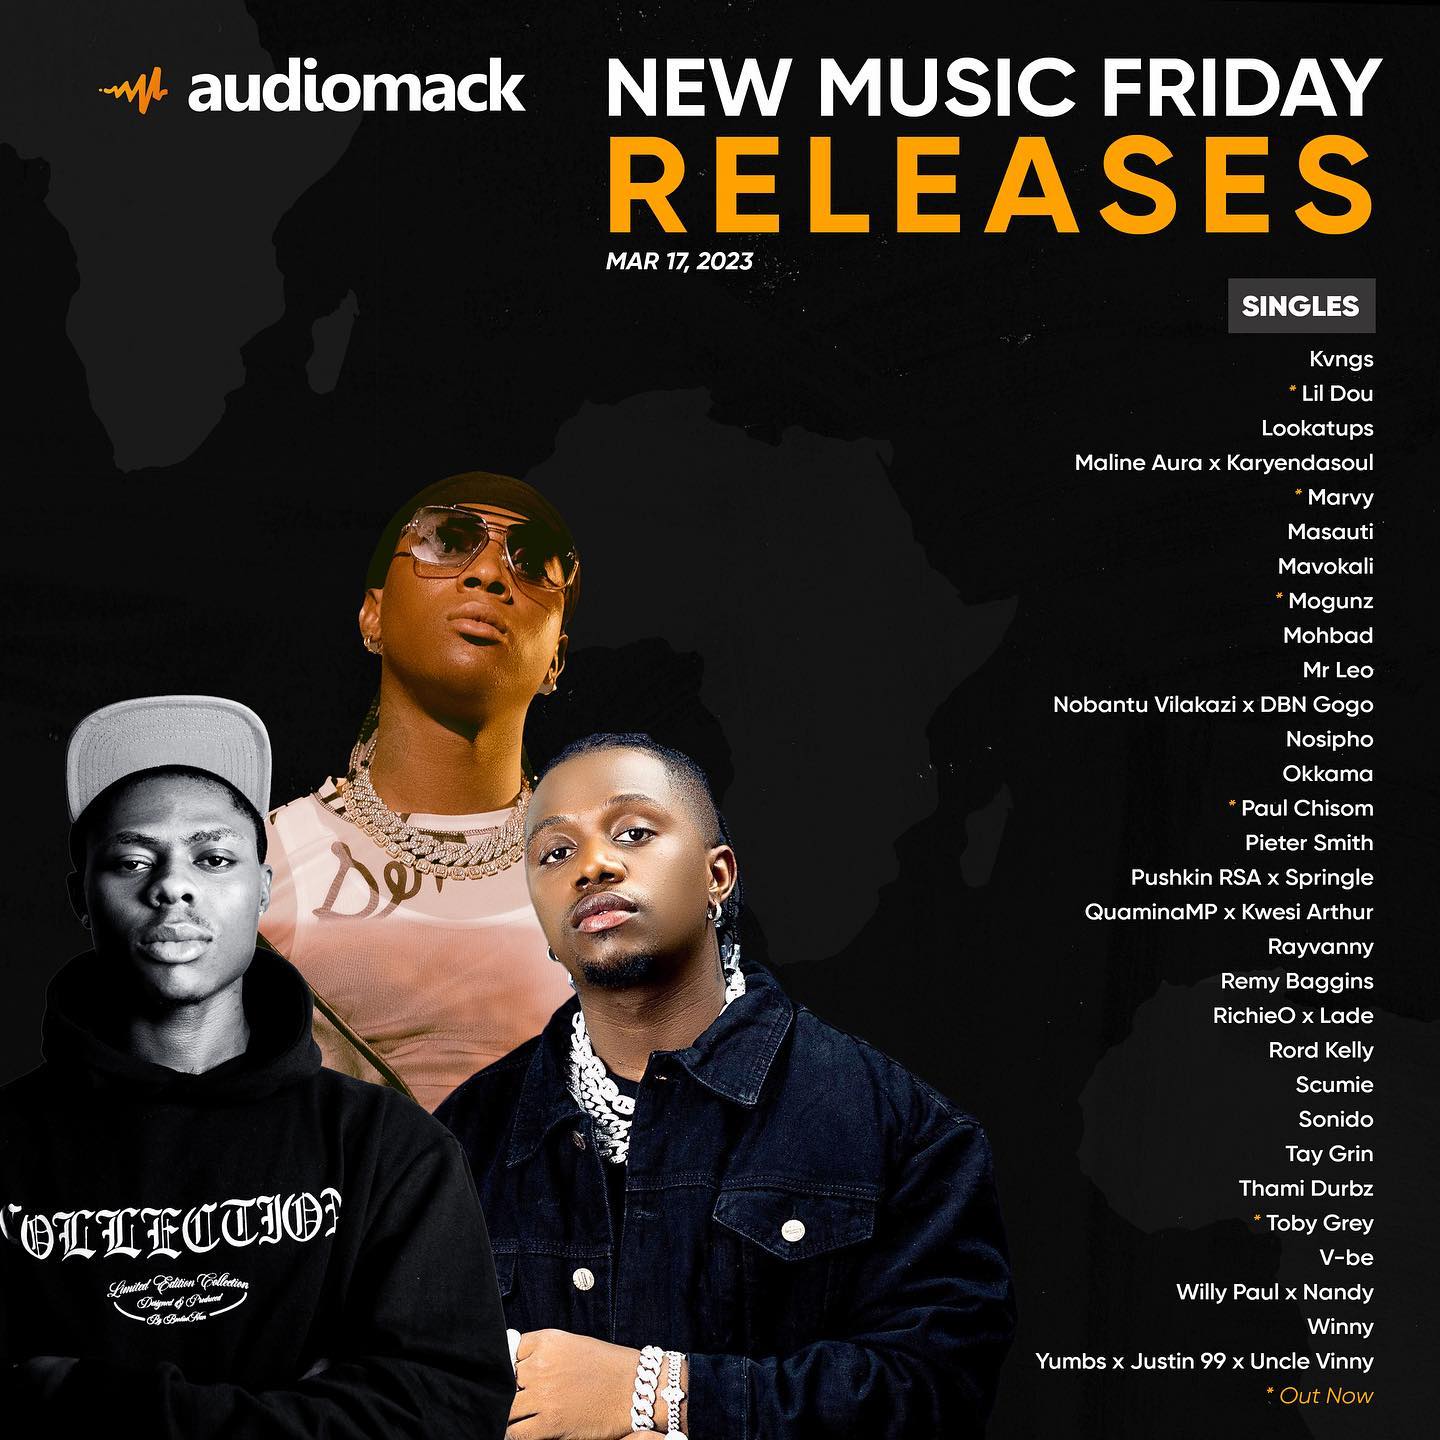 New Music Friday Releases on 17th March 2023 — citiMuzik